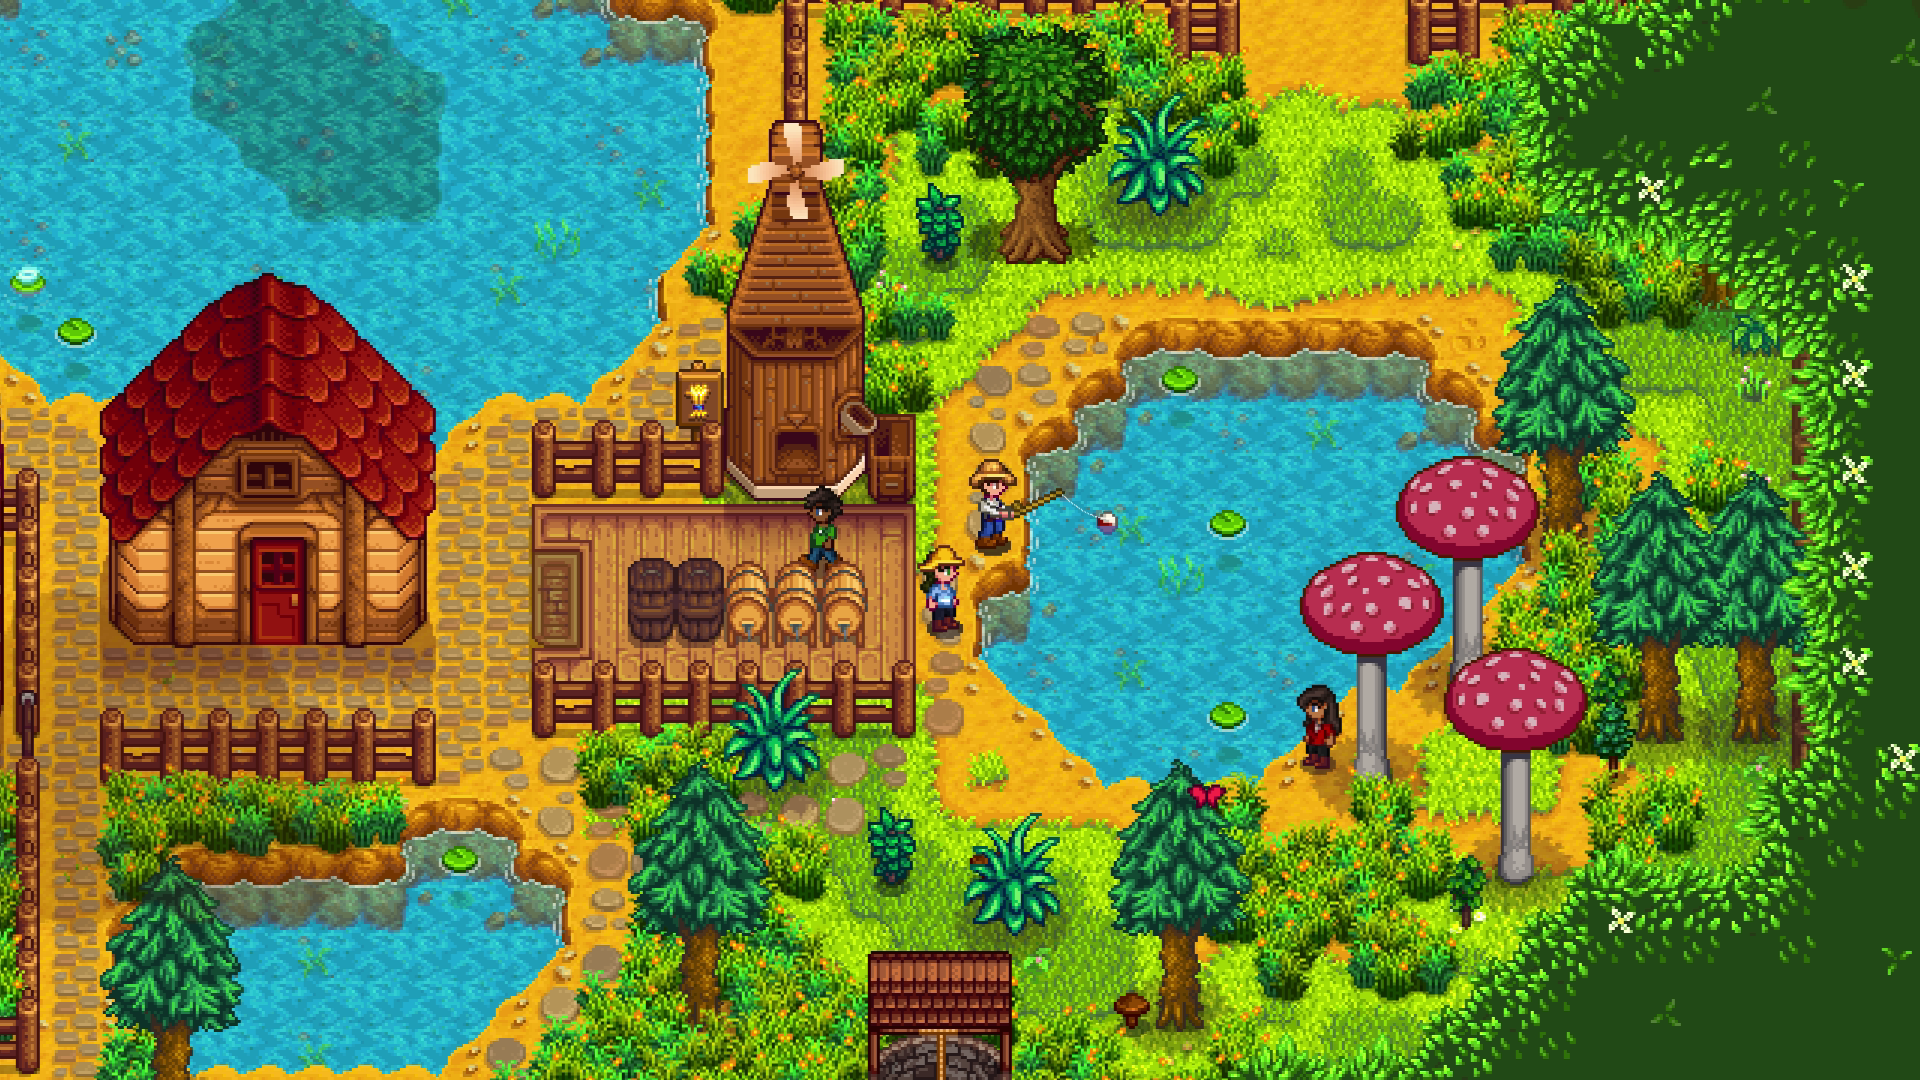 Players fish together in Stardew Valley